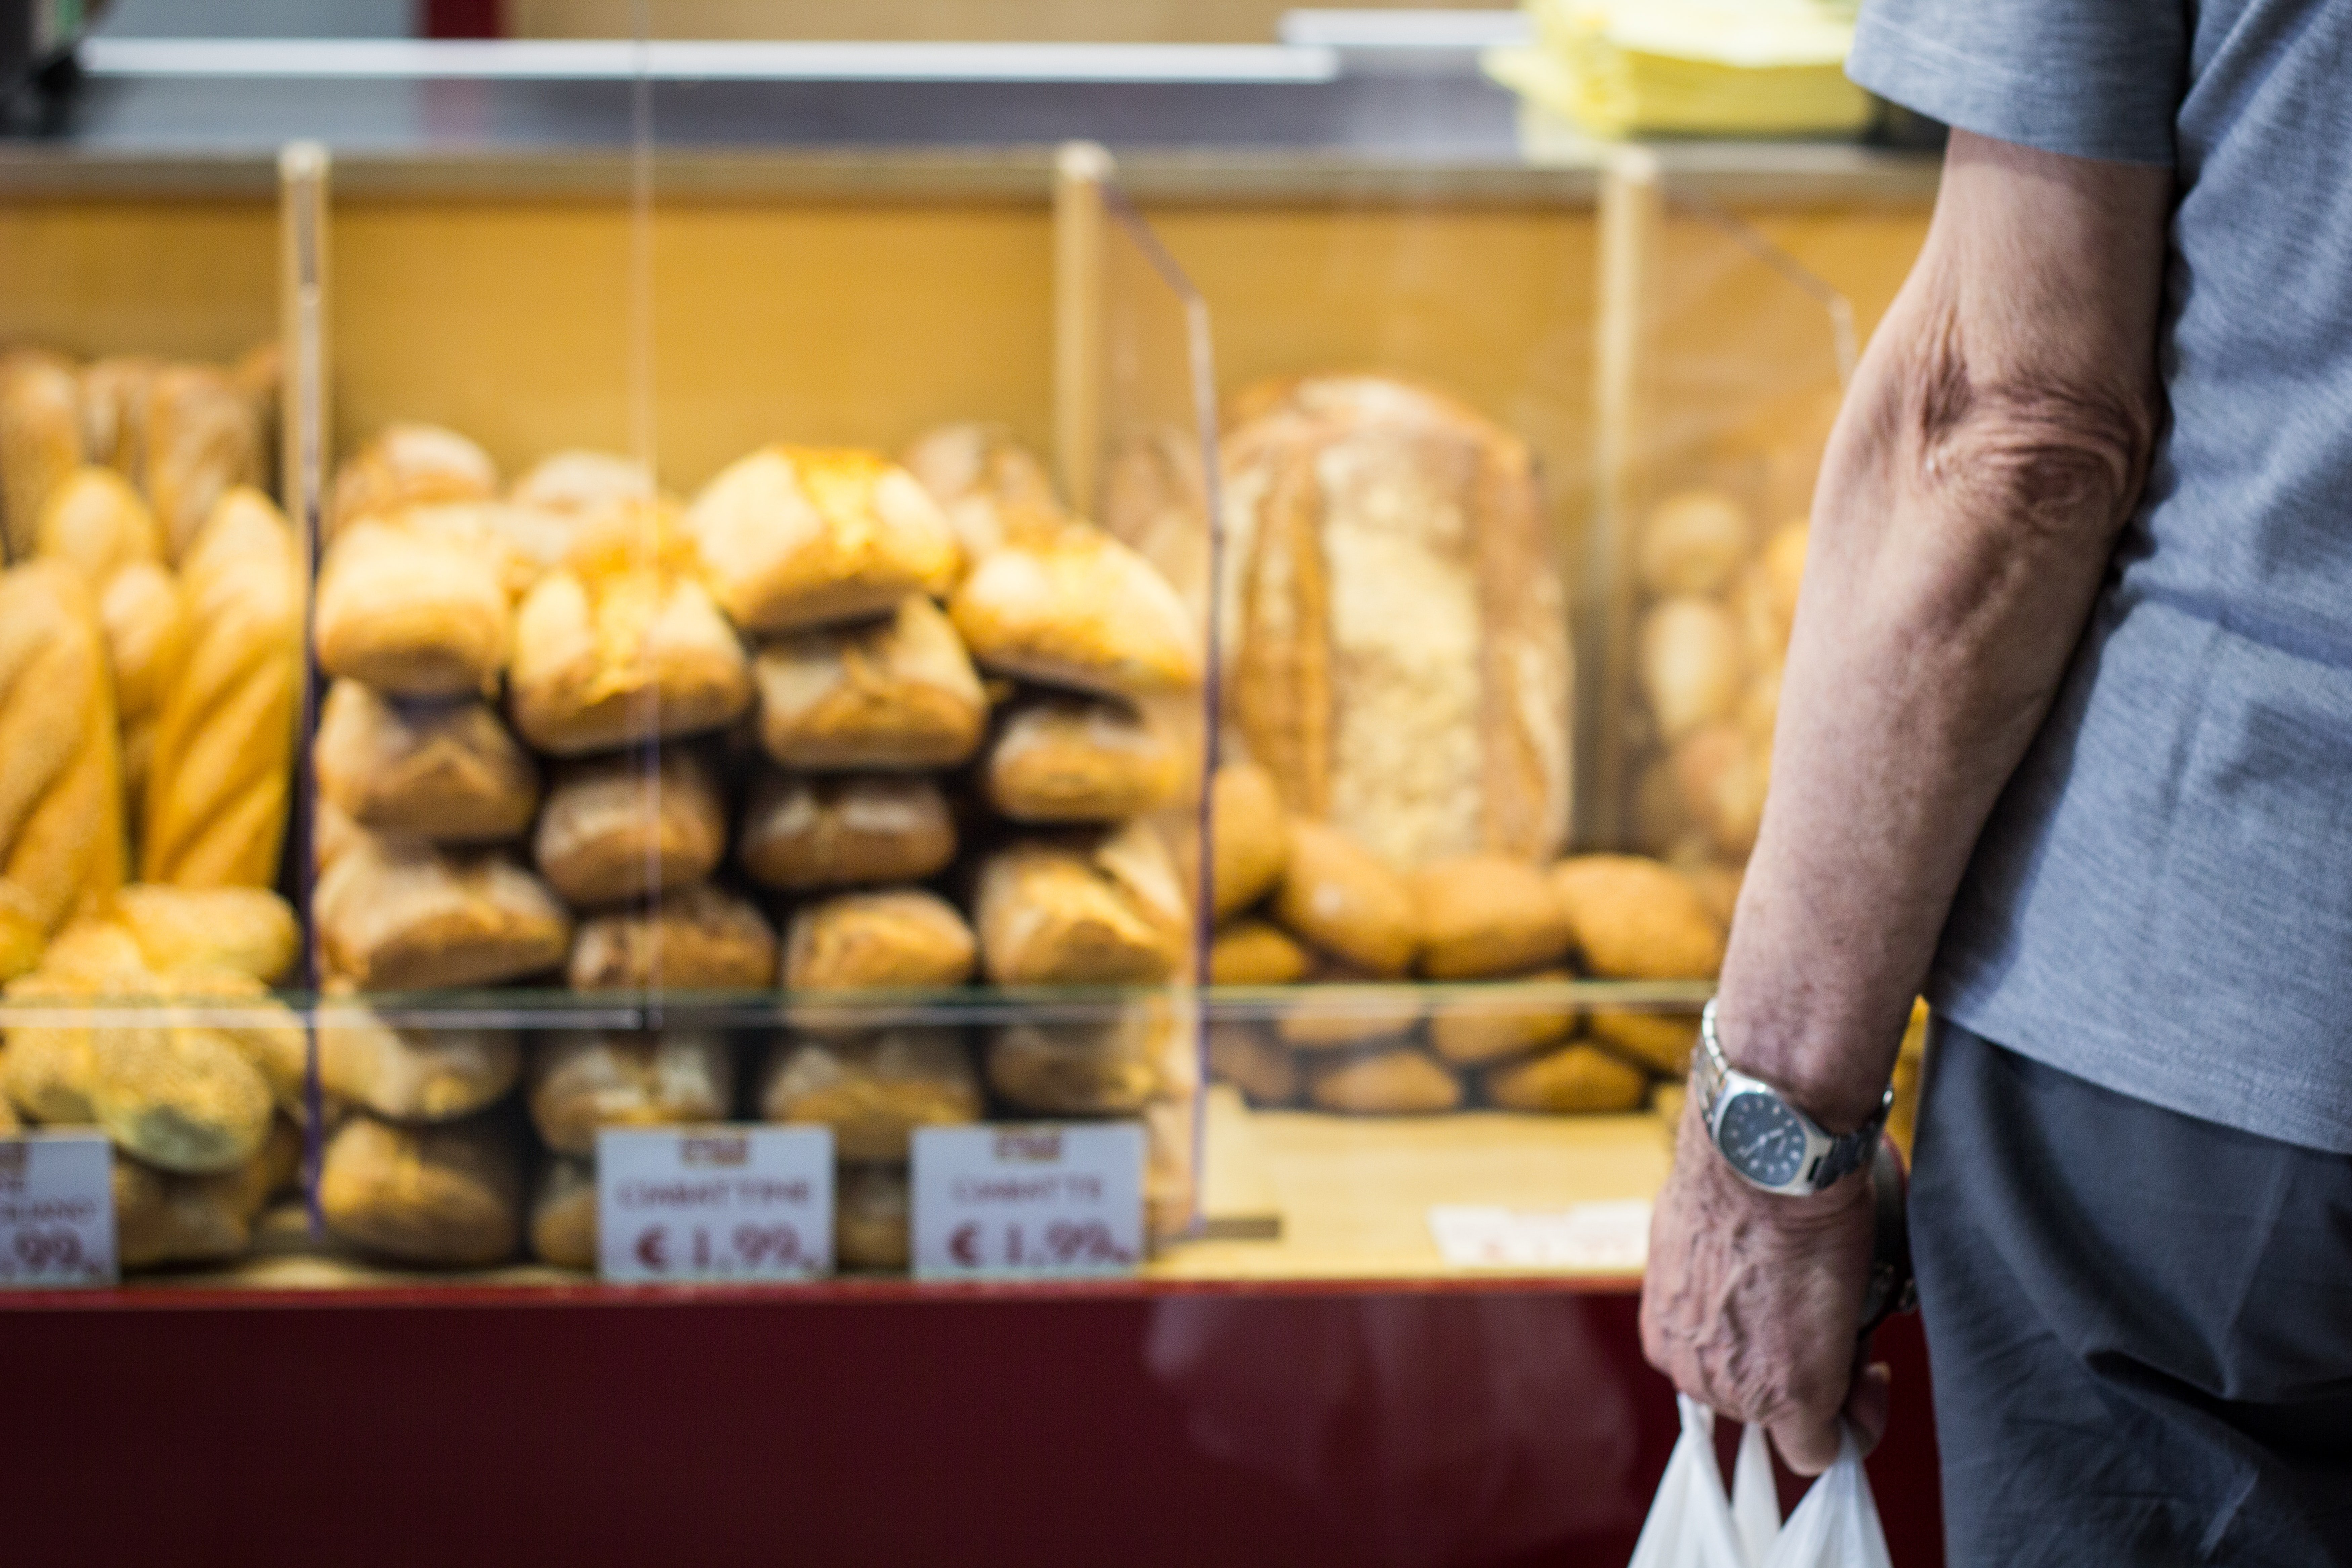 Mr. Young bought bread for the homeless with his first paycheck | Photo: Unsplash